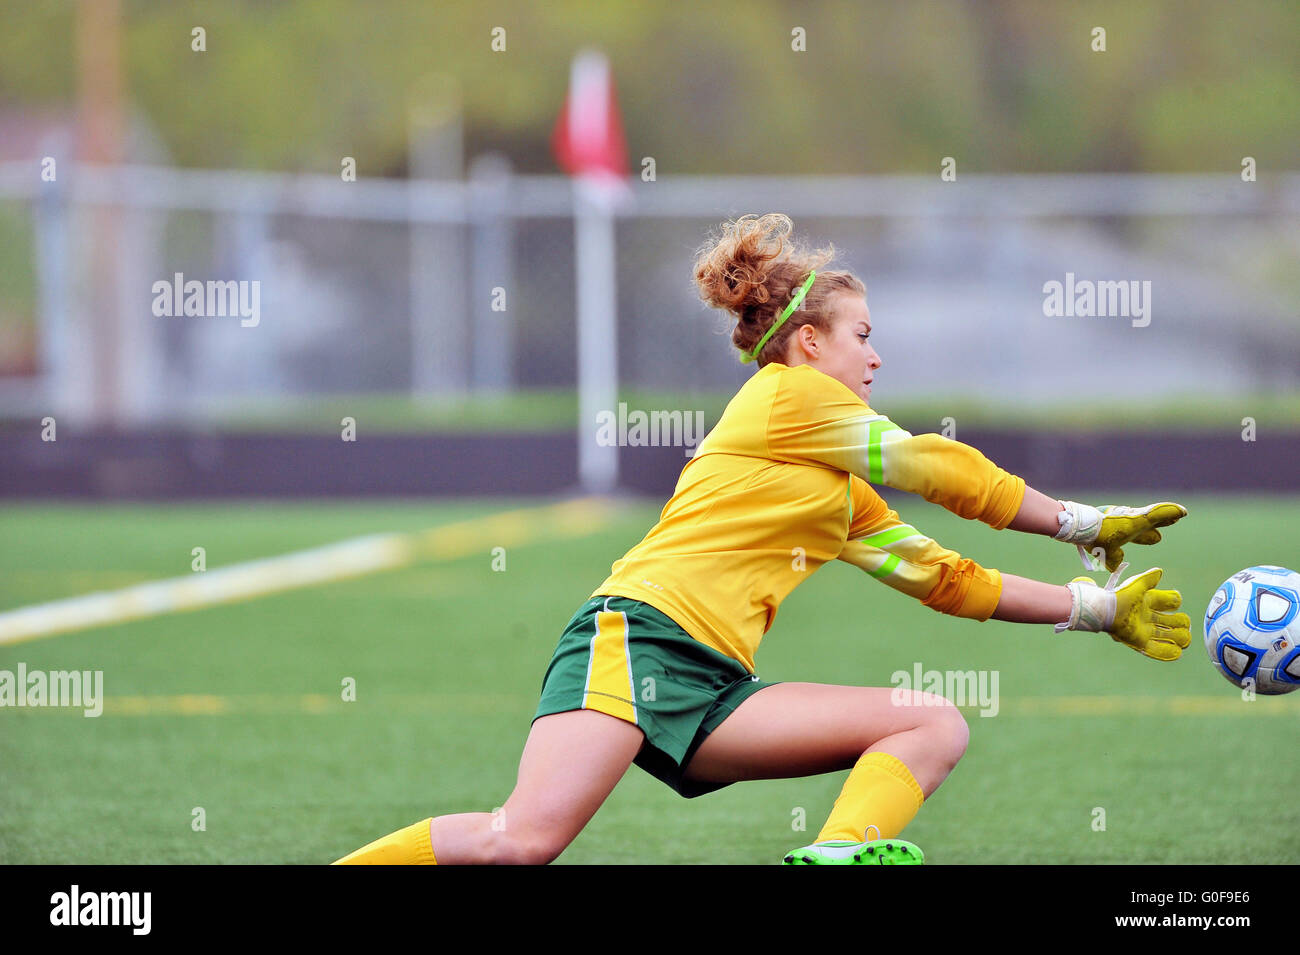 A sprawling keeper diving to make a save on a shot during a high school soccer match. USA. Stock Photo